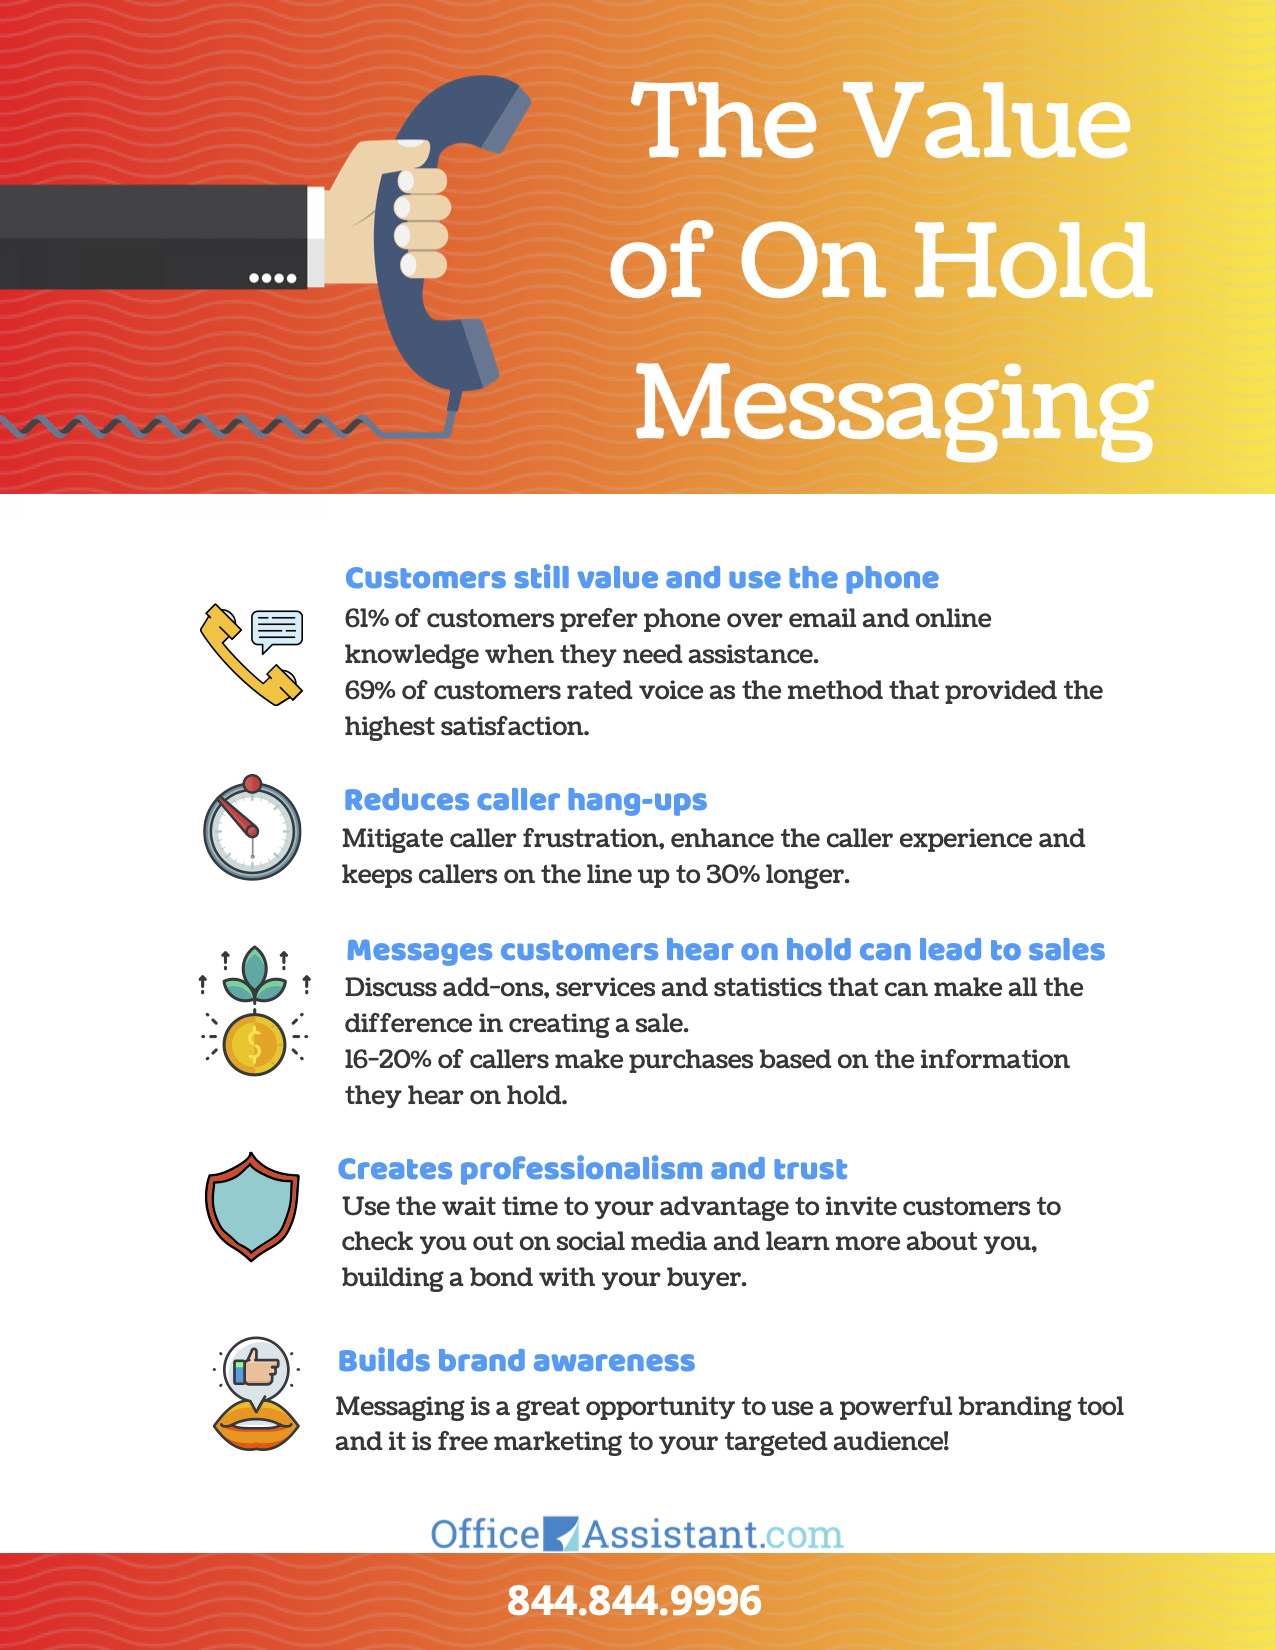 Value of On Hold Messaging